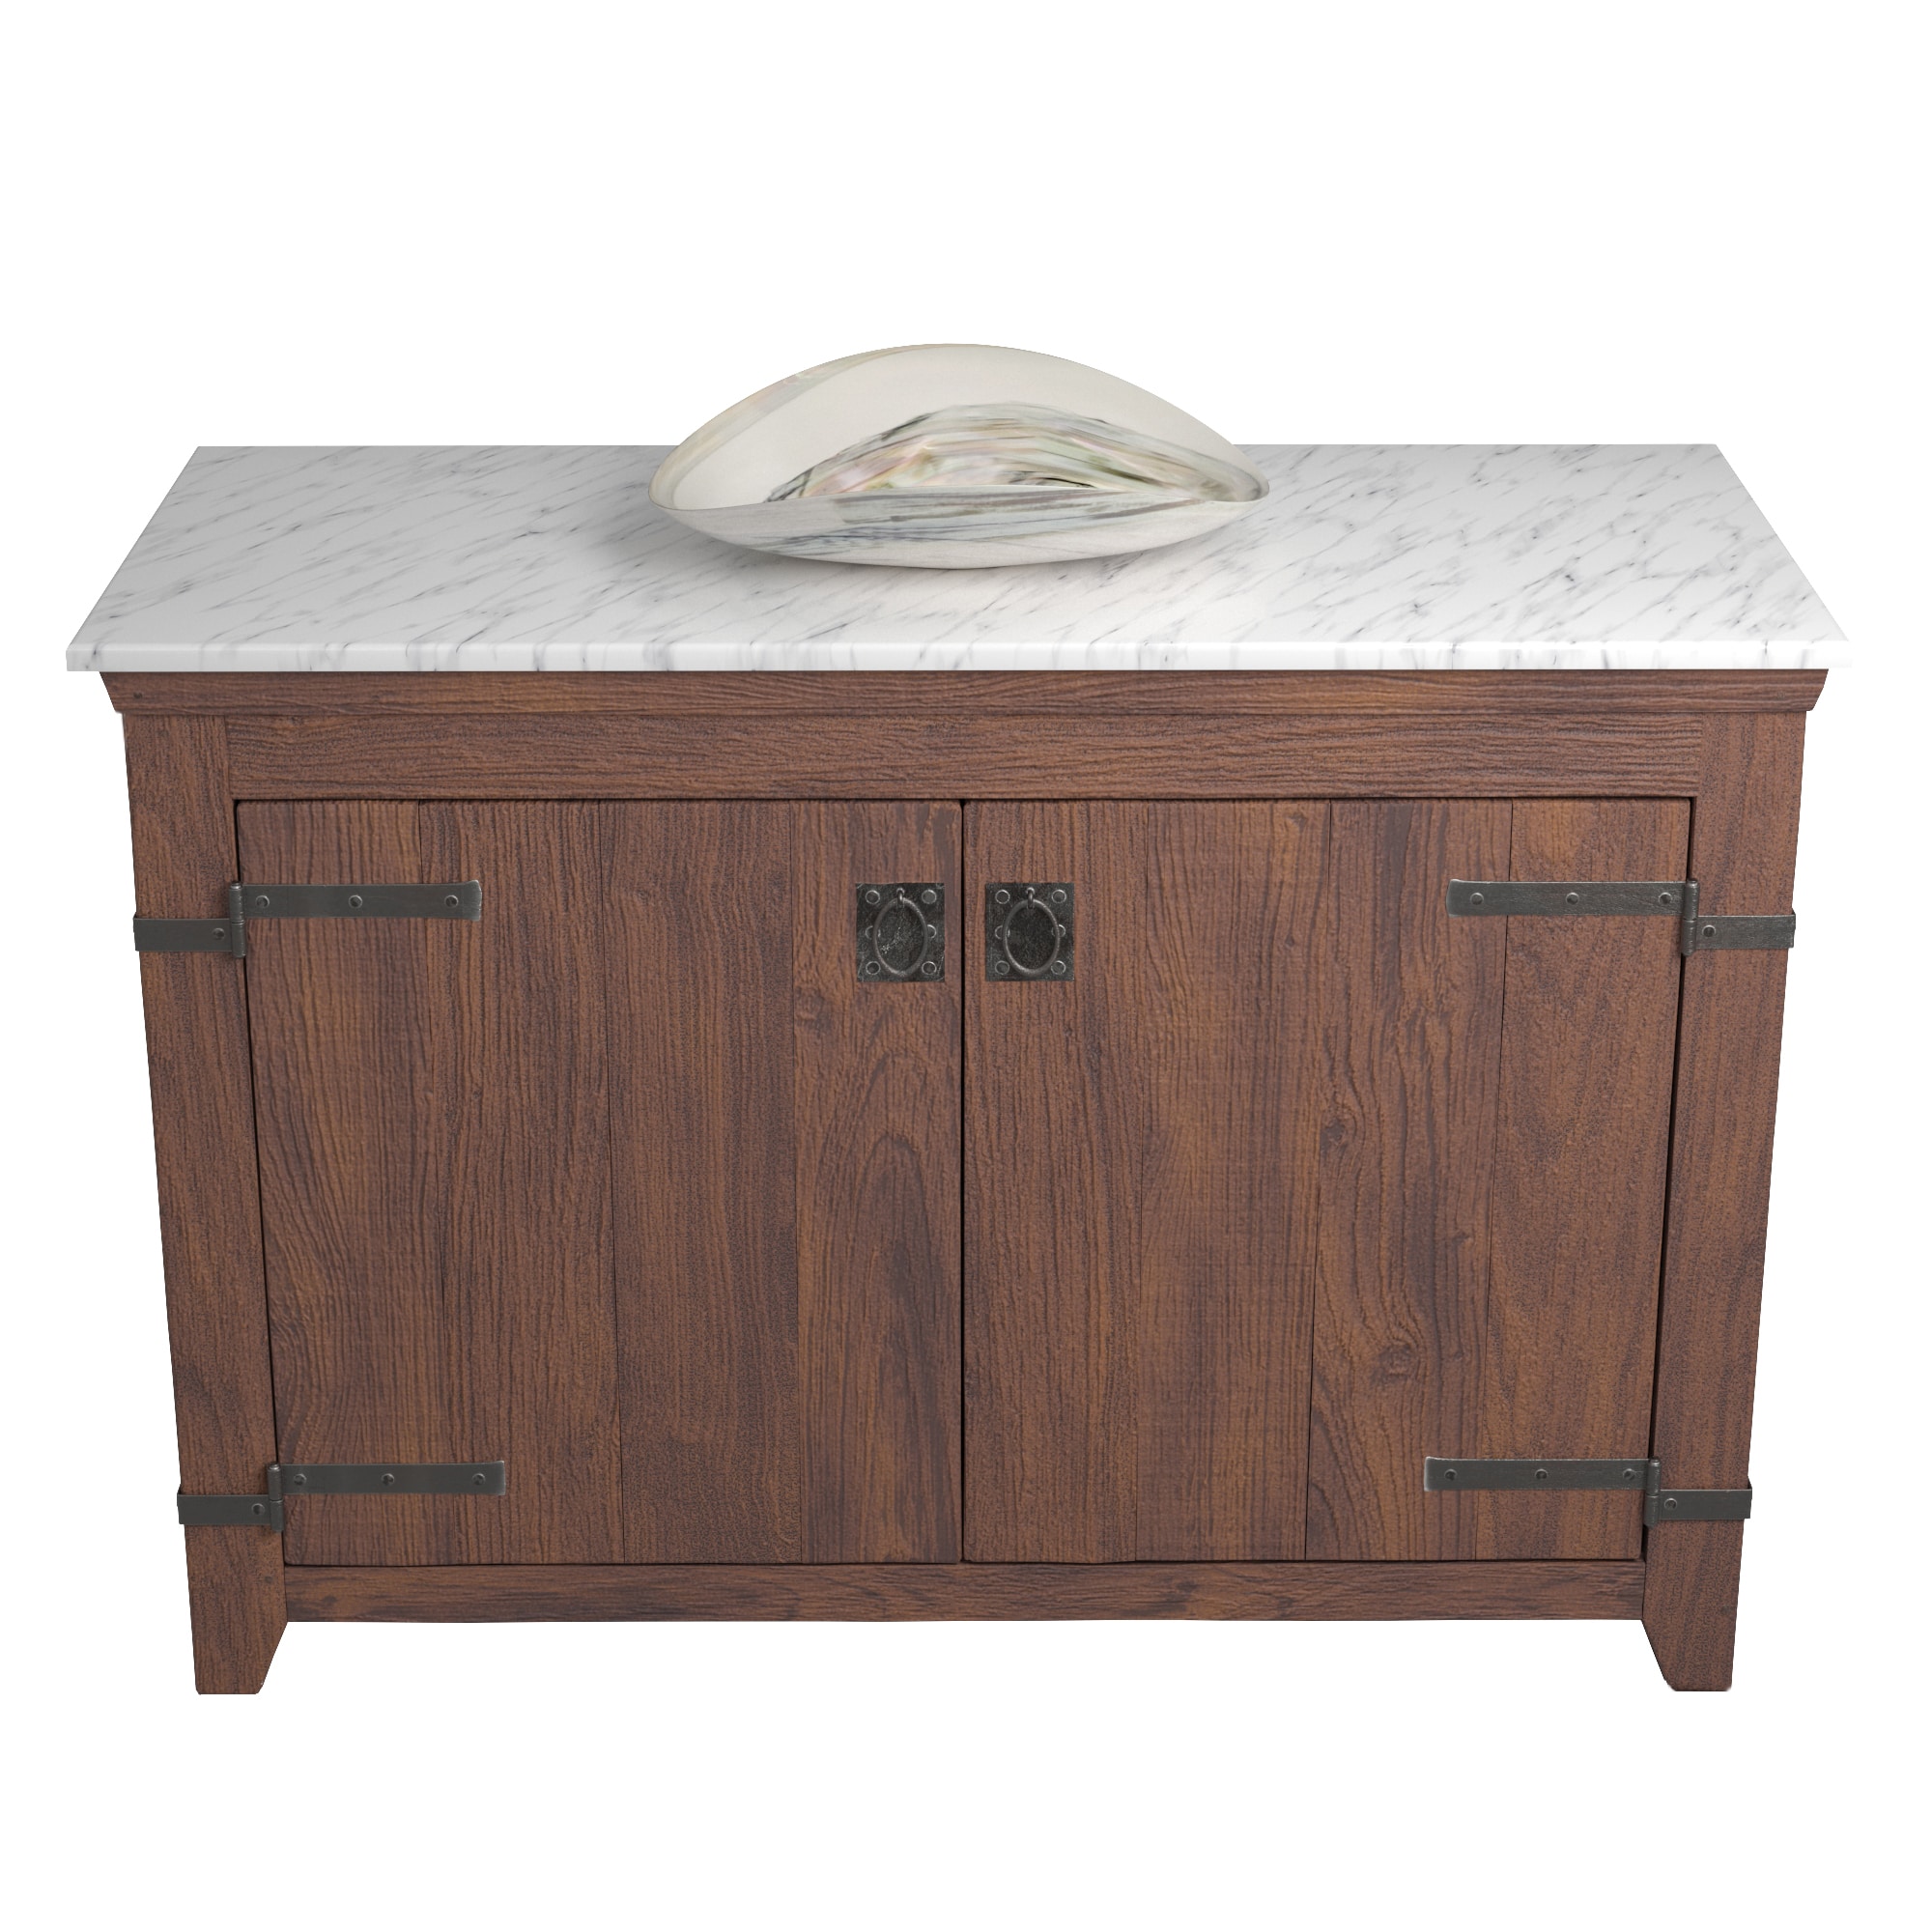 Native Trails 48" Americana Vanity in Chestnut with Carrara Marble Top and Sorrento in Abalone, Single Faucet Hole, BND48-VB-CT-MG-091